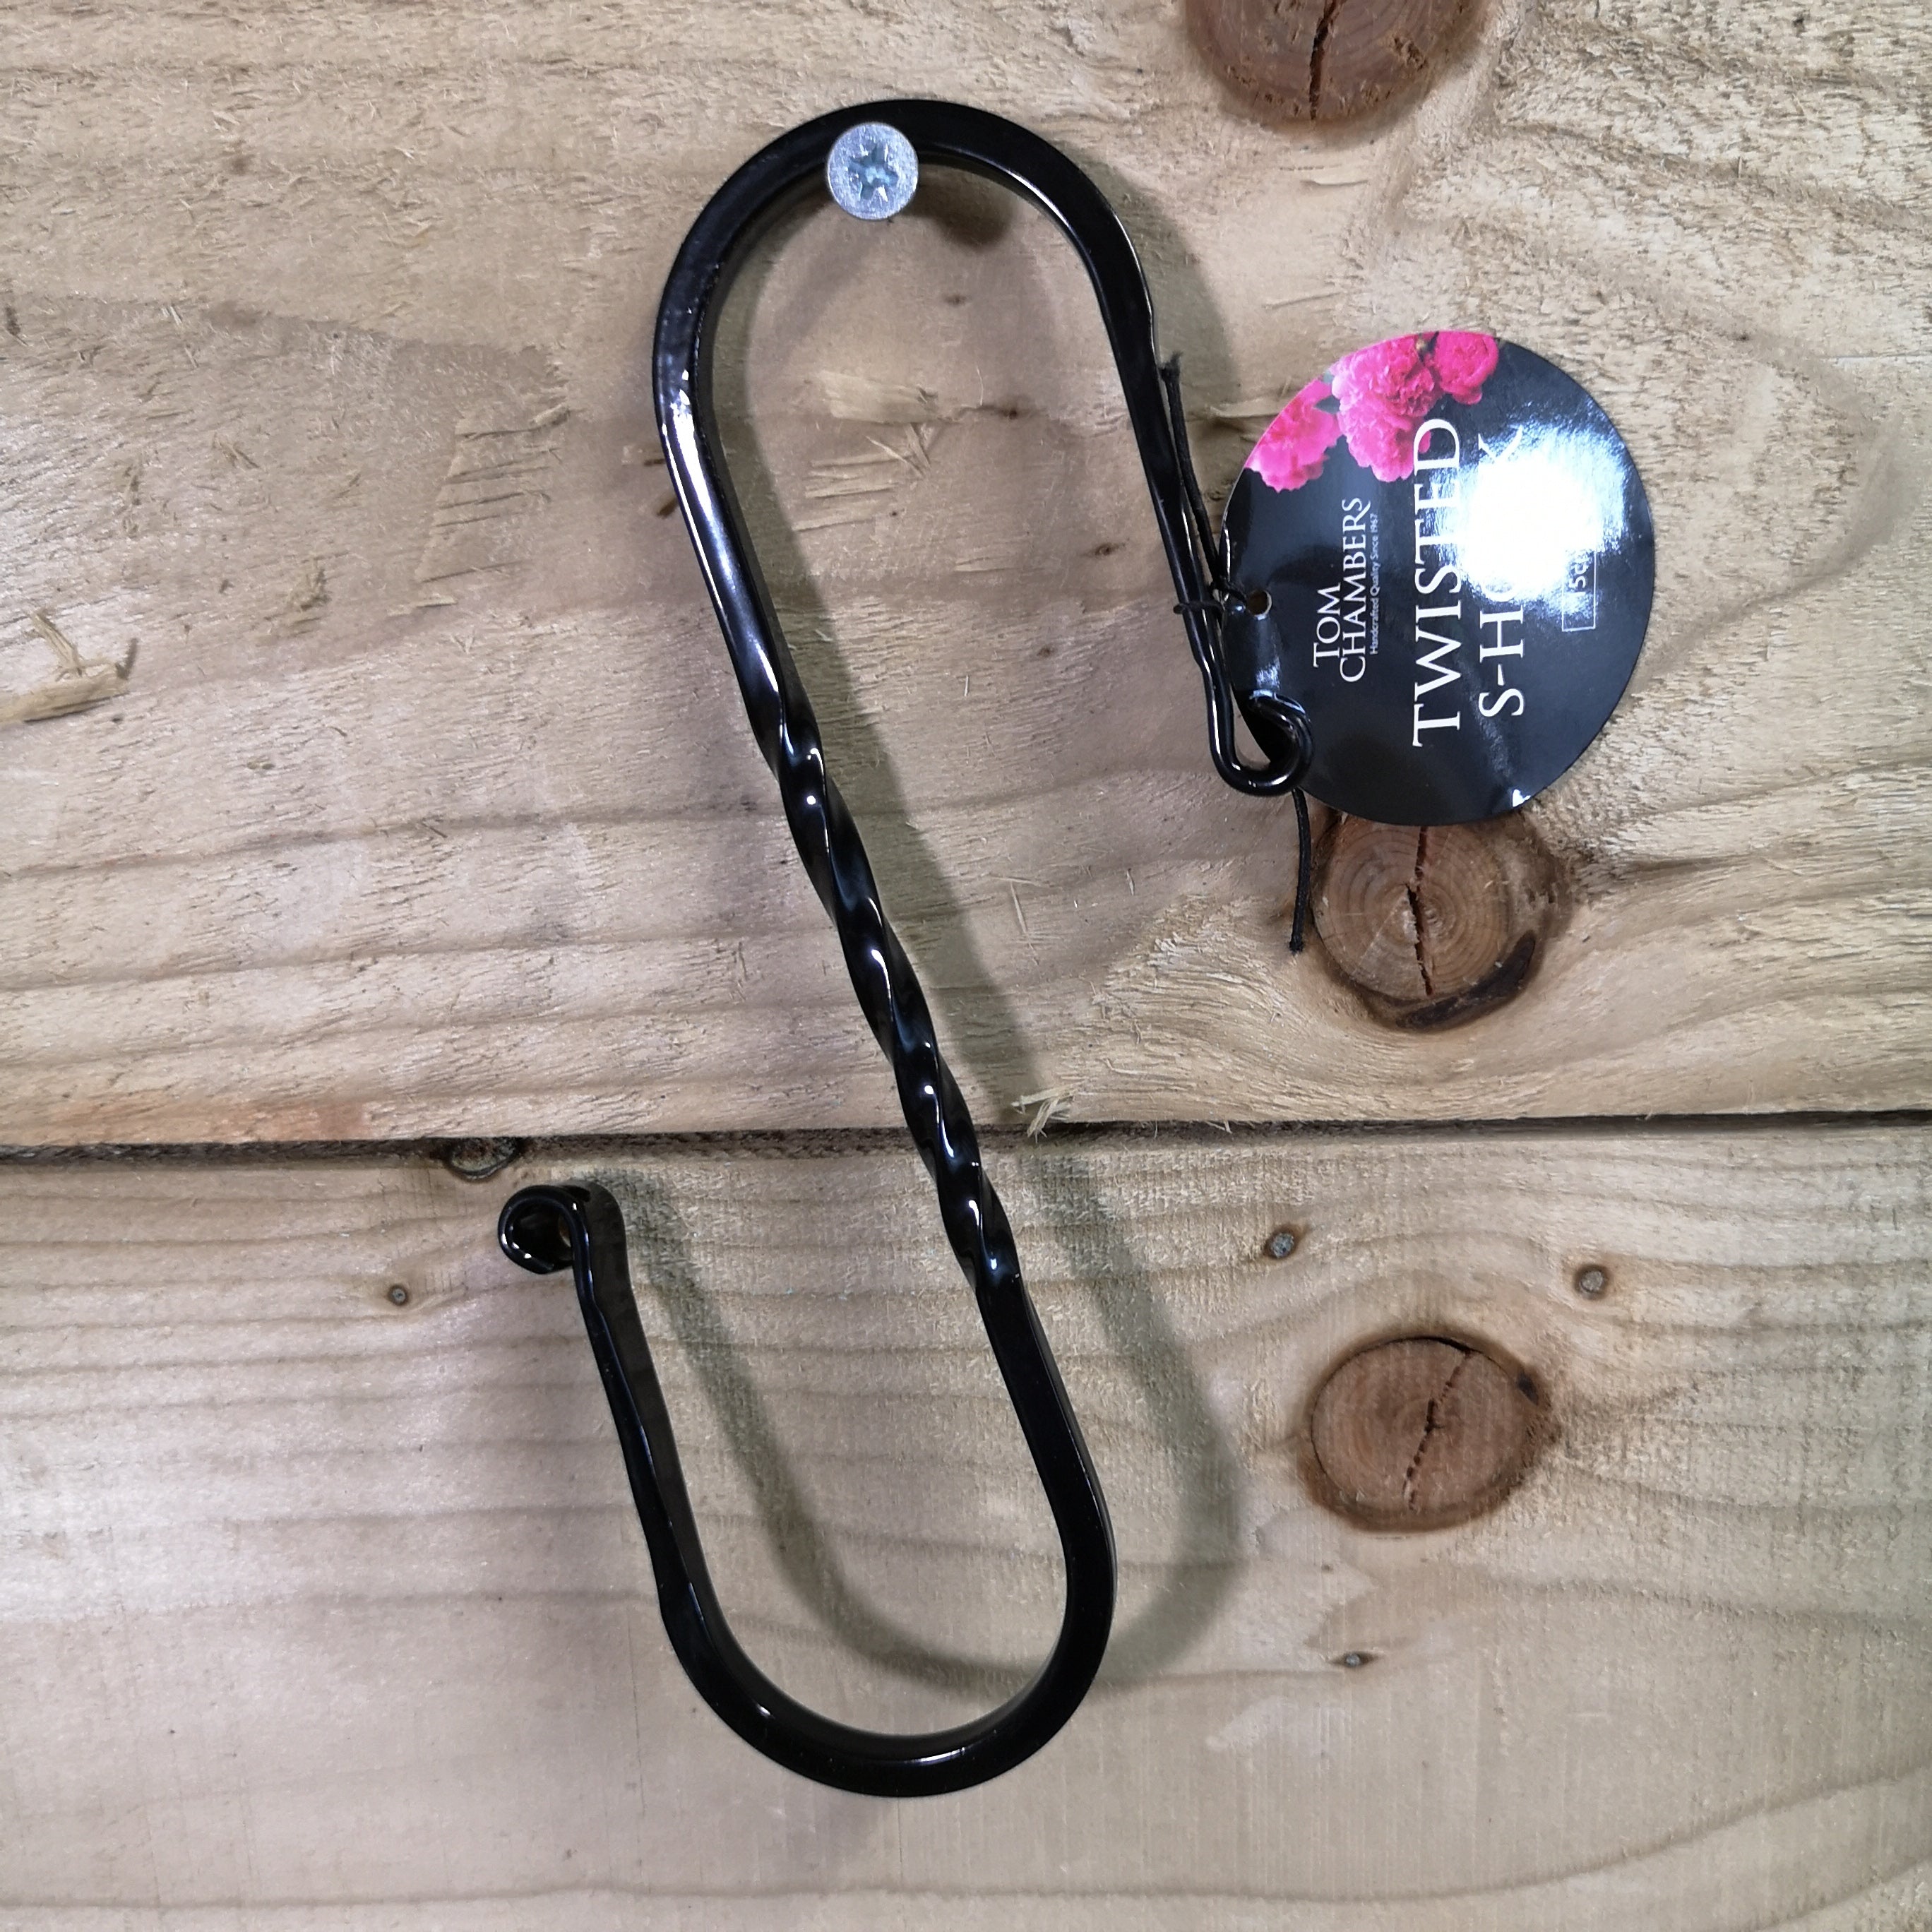 15cm Tom Chambers Black Metal Twisted Design S Hook for Garden Wild Bird Feeders and Boxes